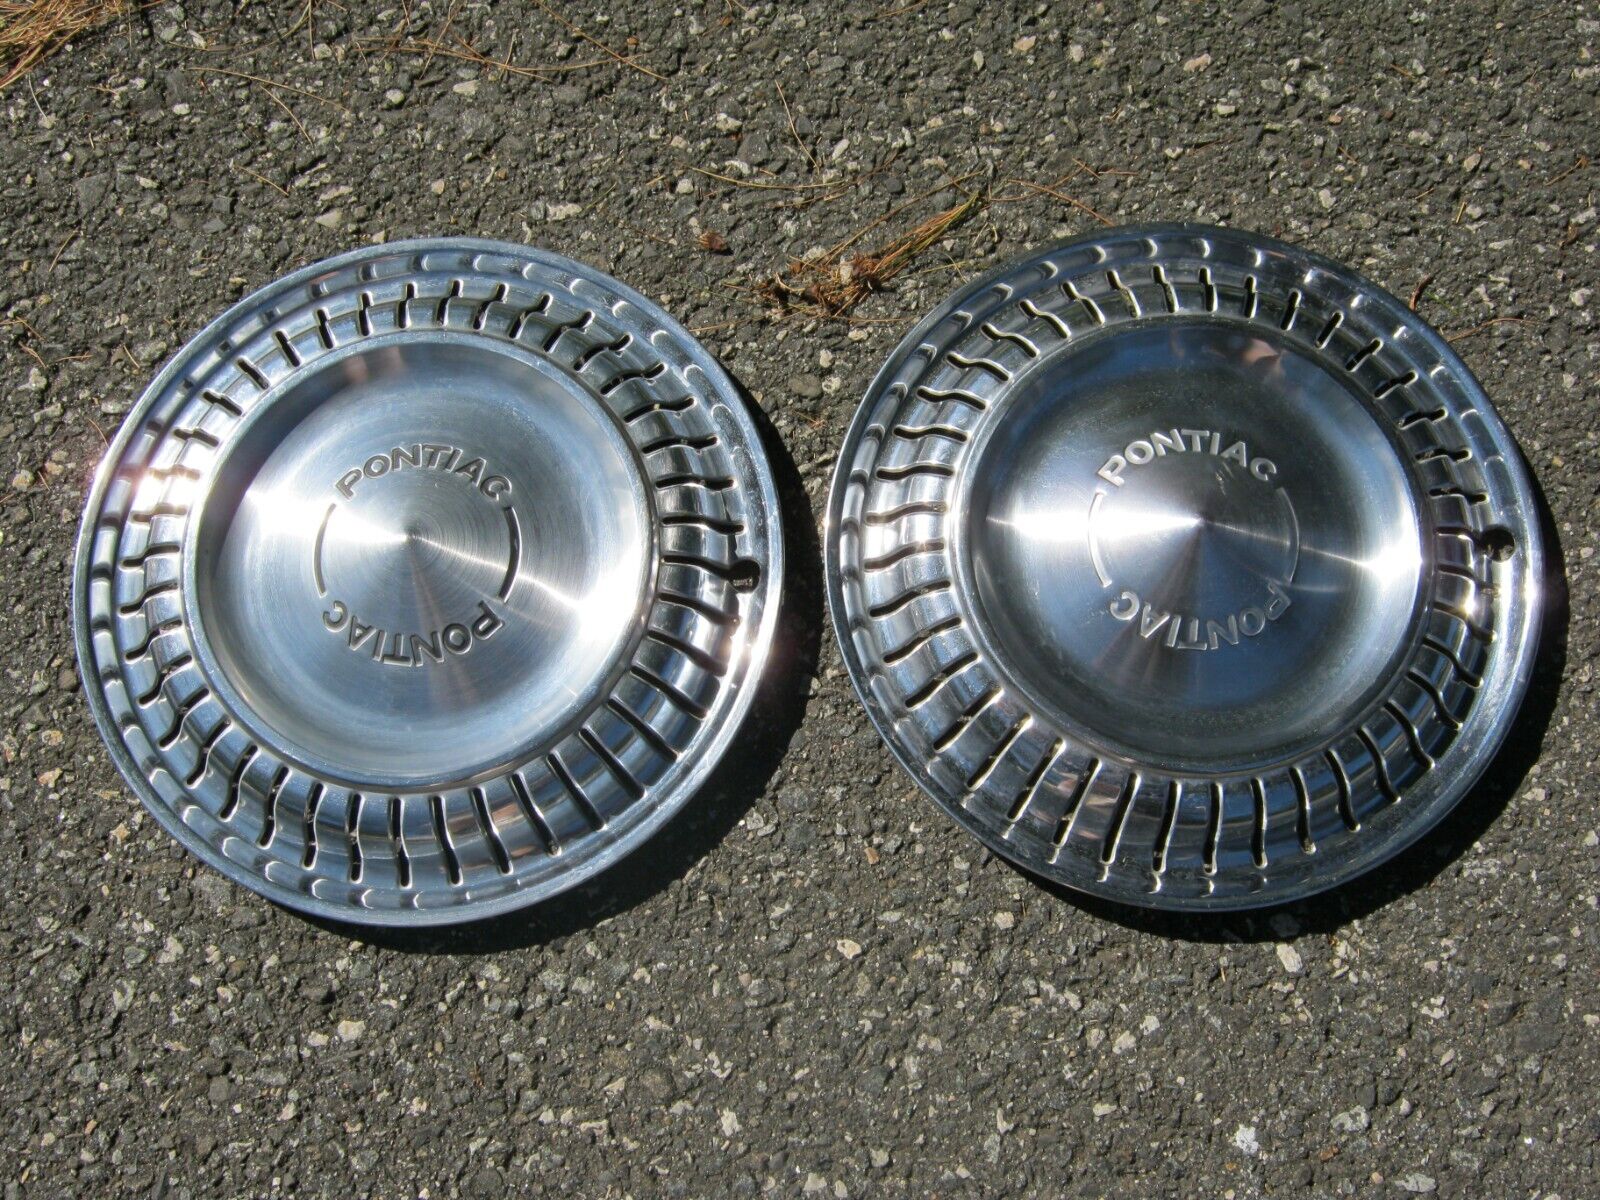 Factory 1975 to 1980 Pontiac Sunbird Astre 13 inch metal hubcaps wheel covers